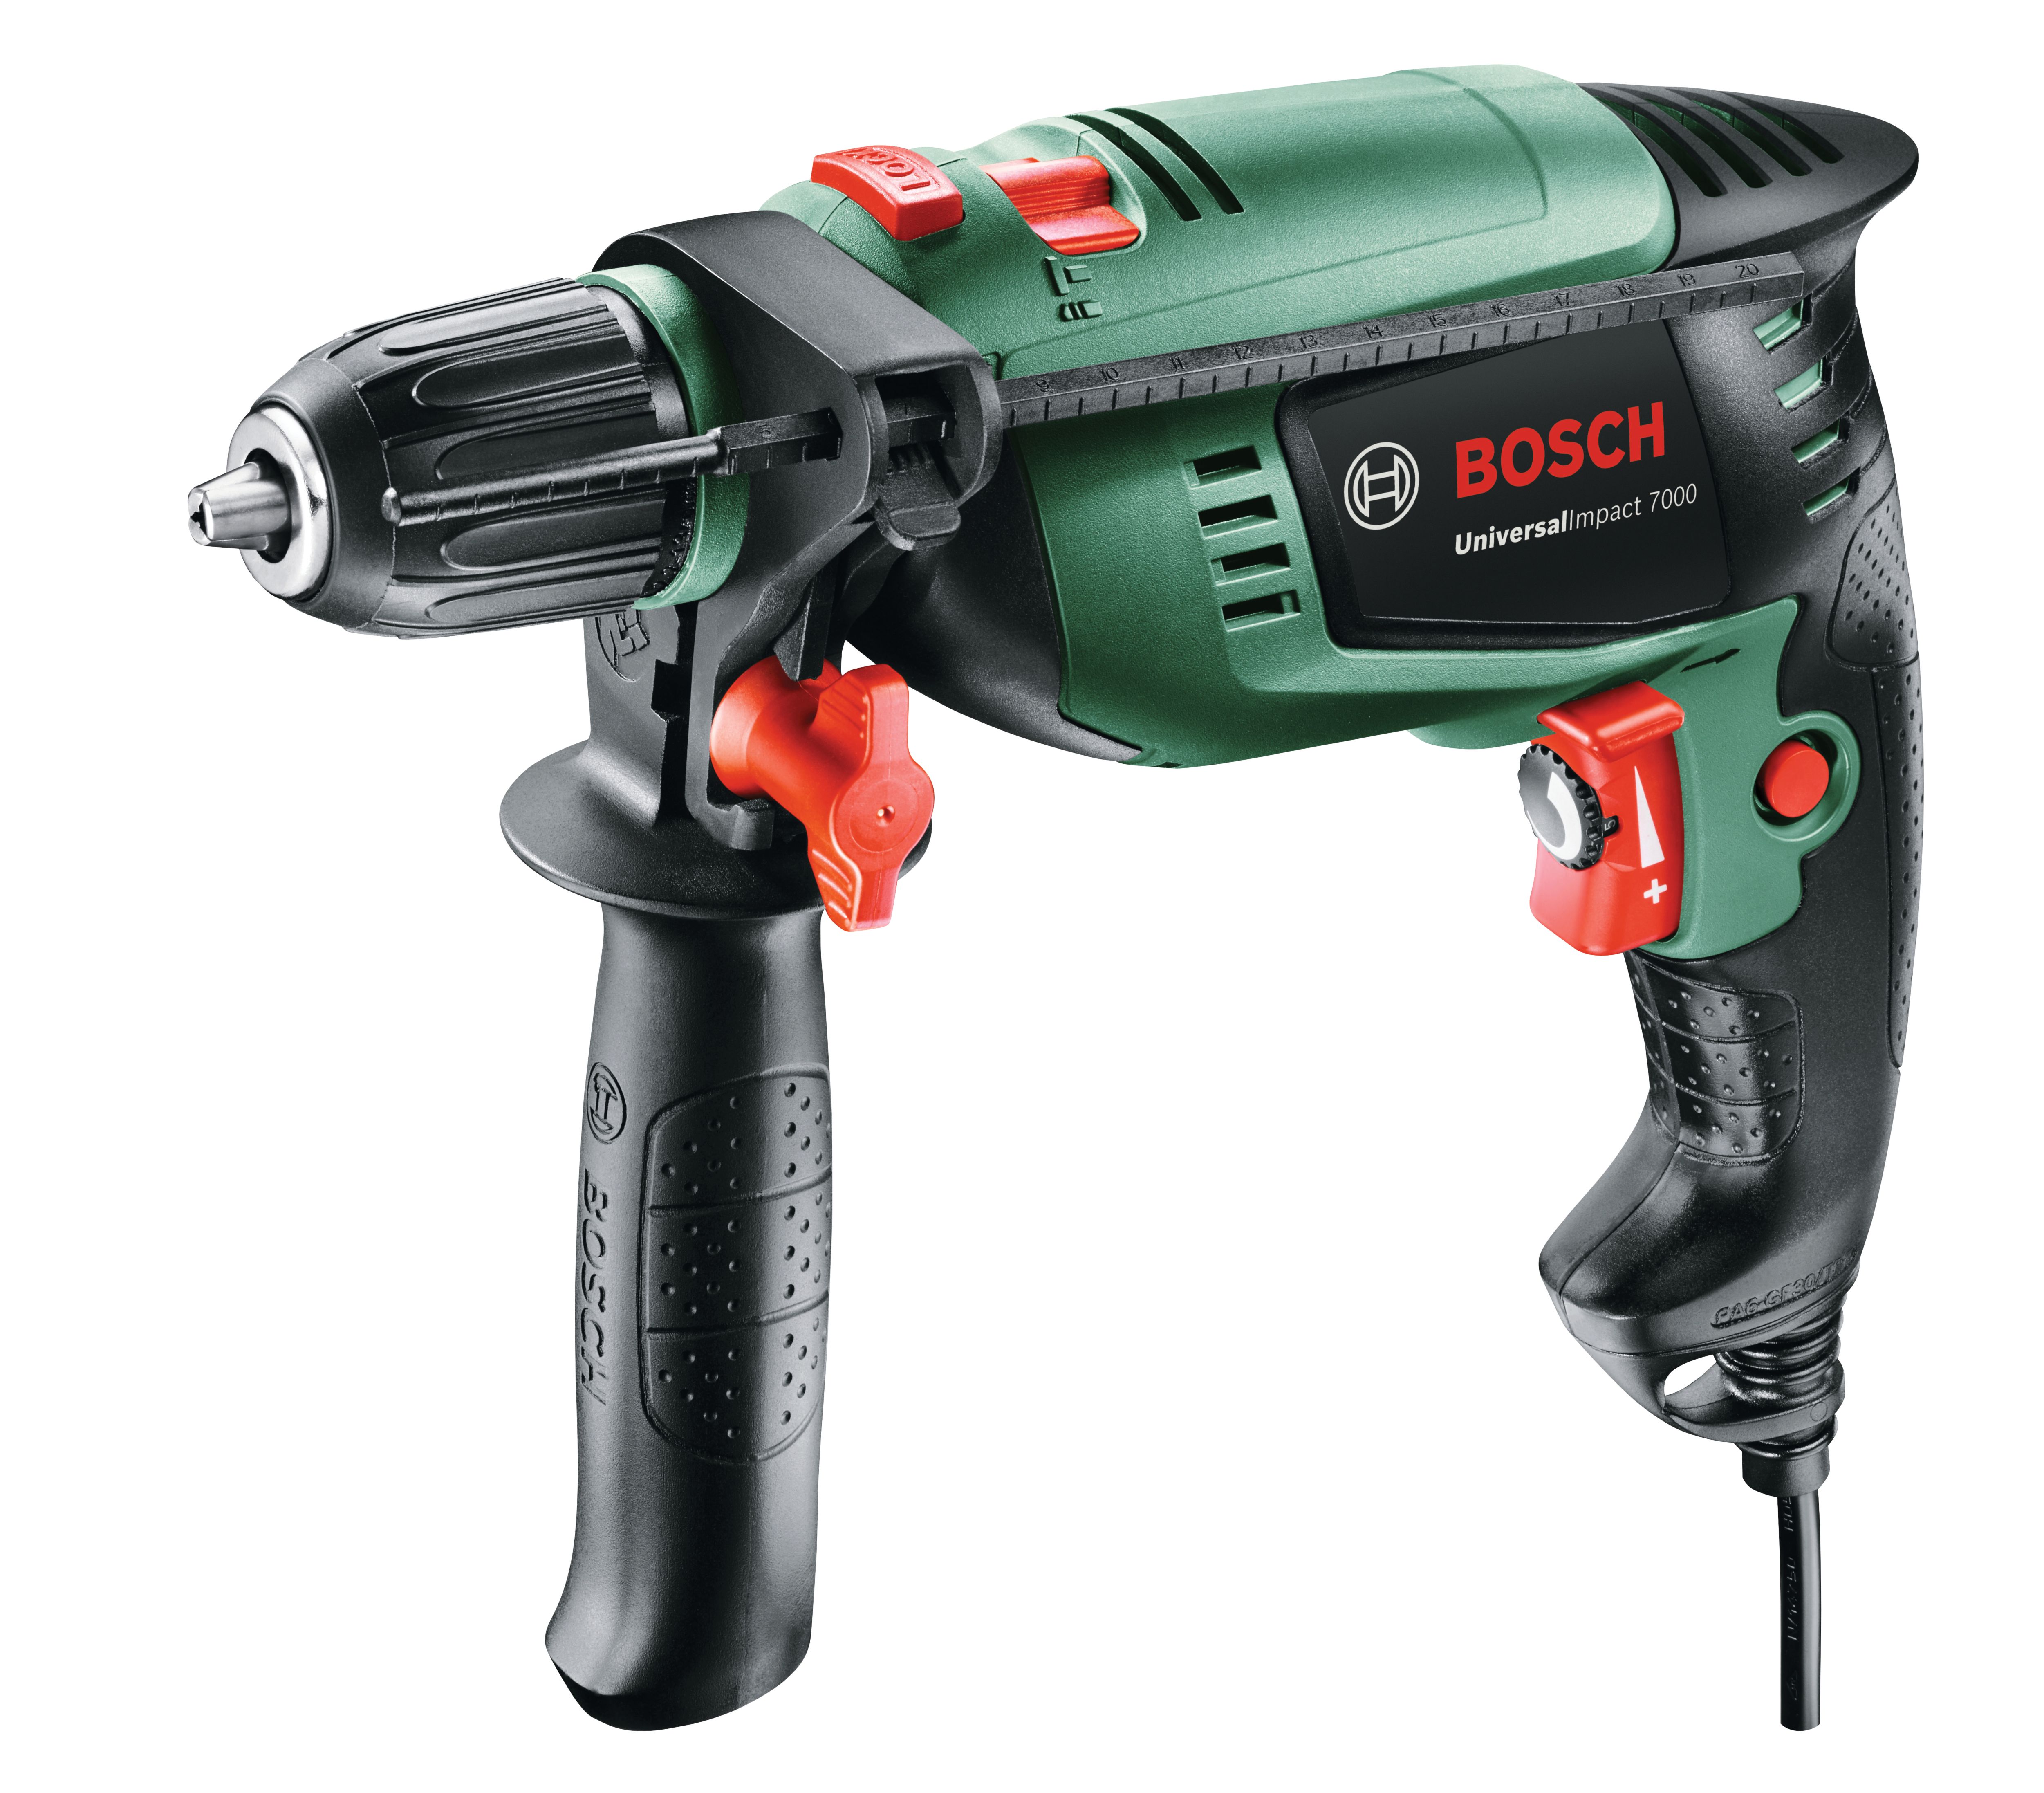 Image of Bosch Universal Impact 700 Corded Impact Drill - 701W